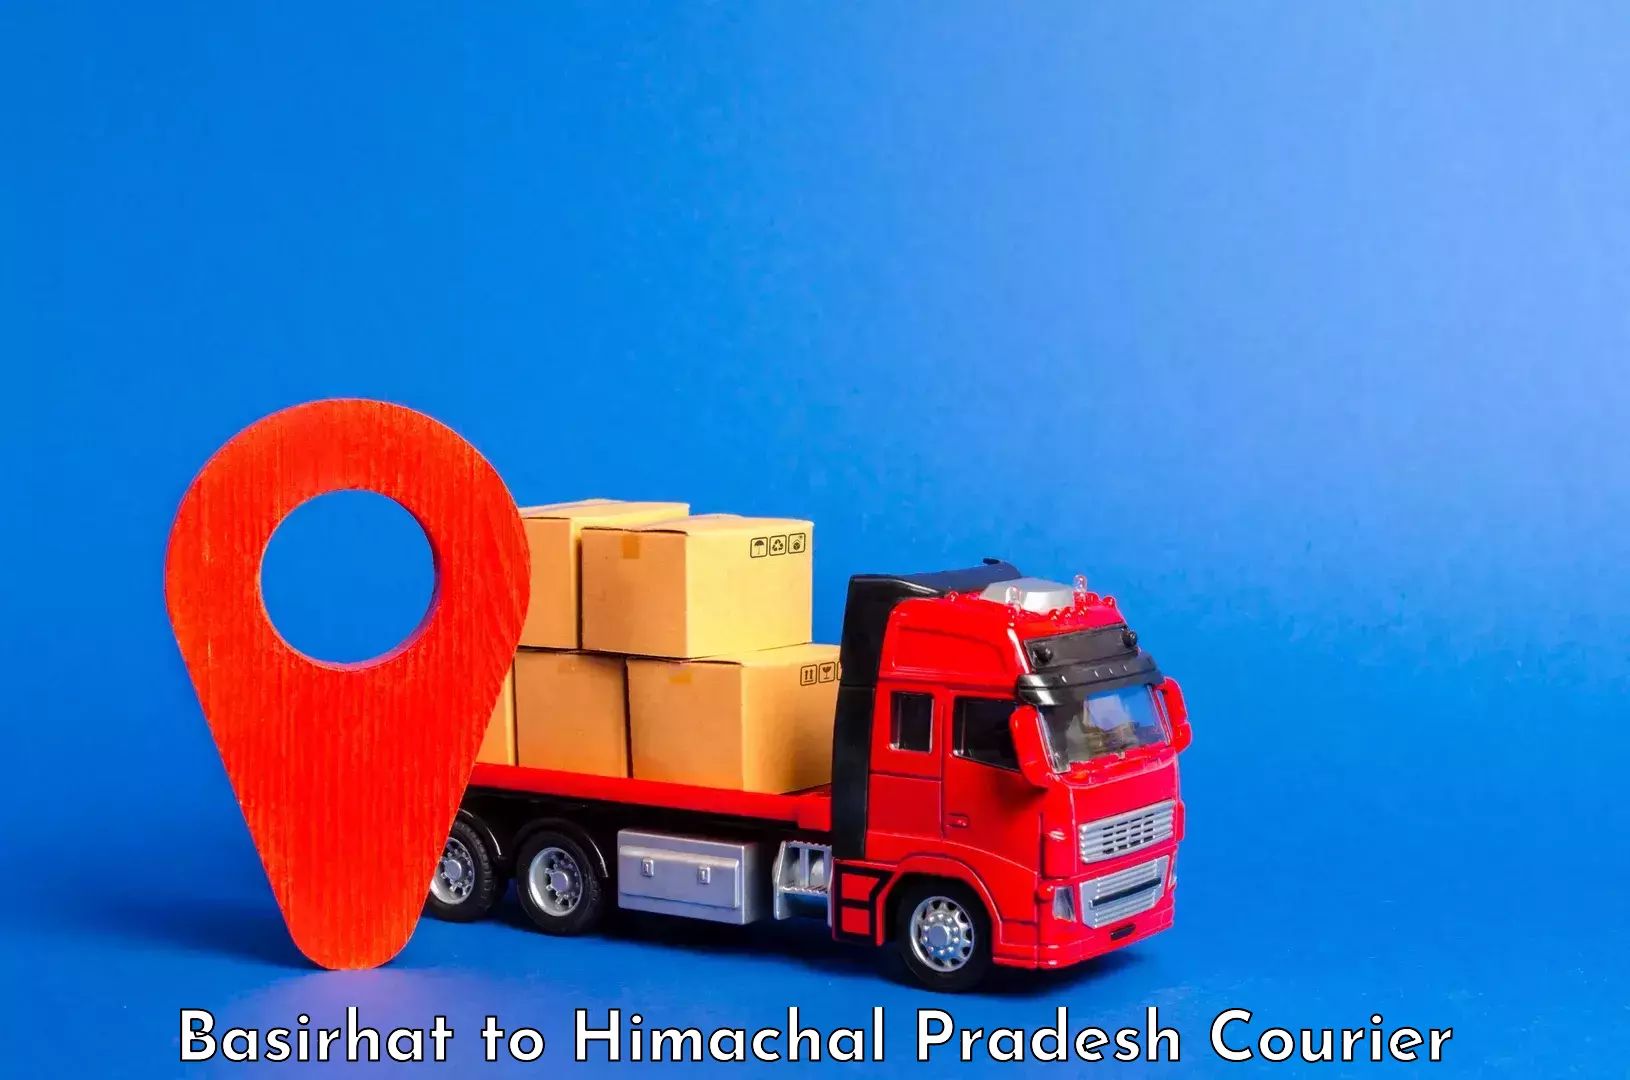 Luggage shipping specialists Basirhat to Himachal Pradesh